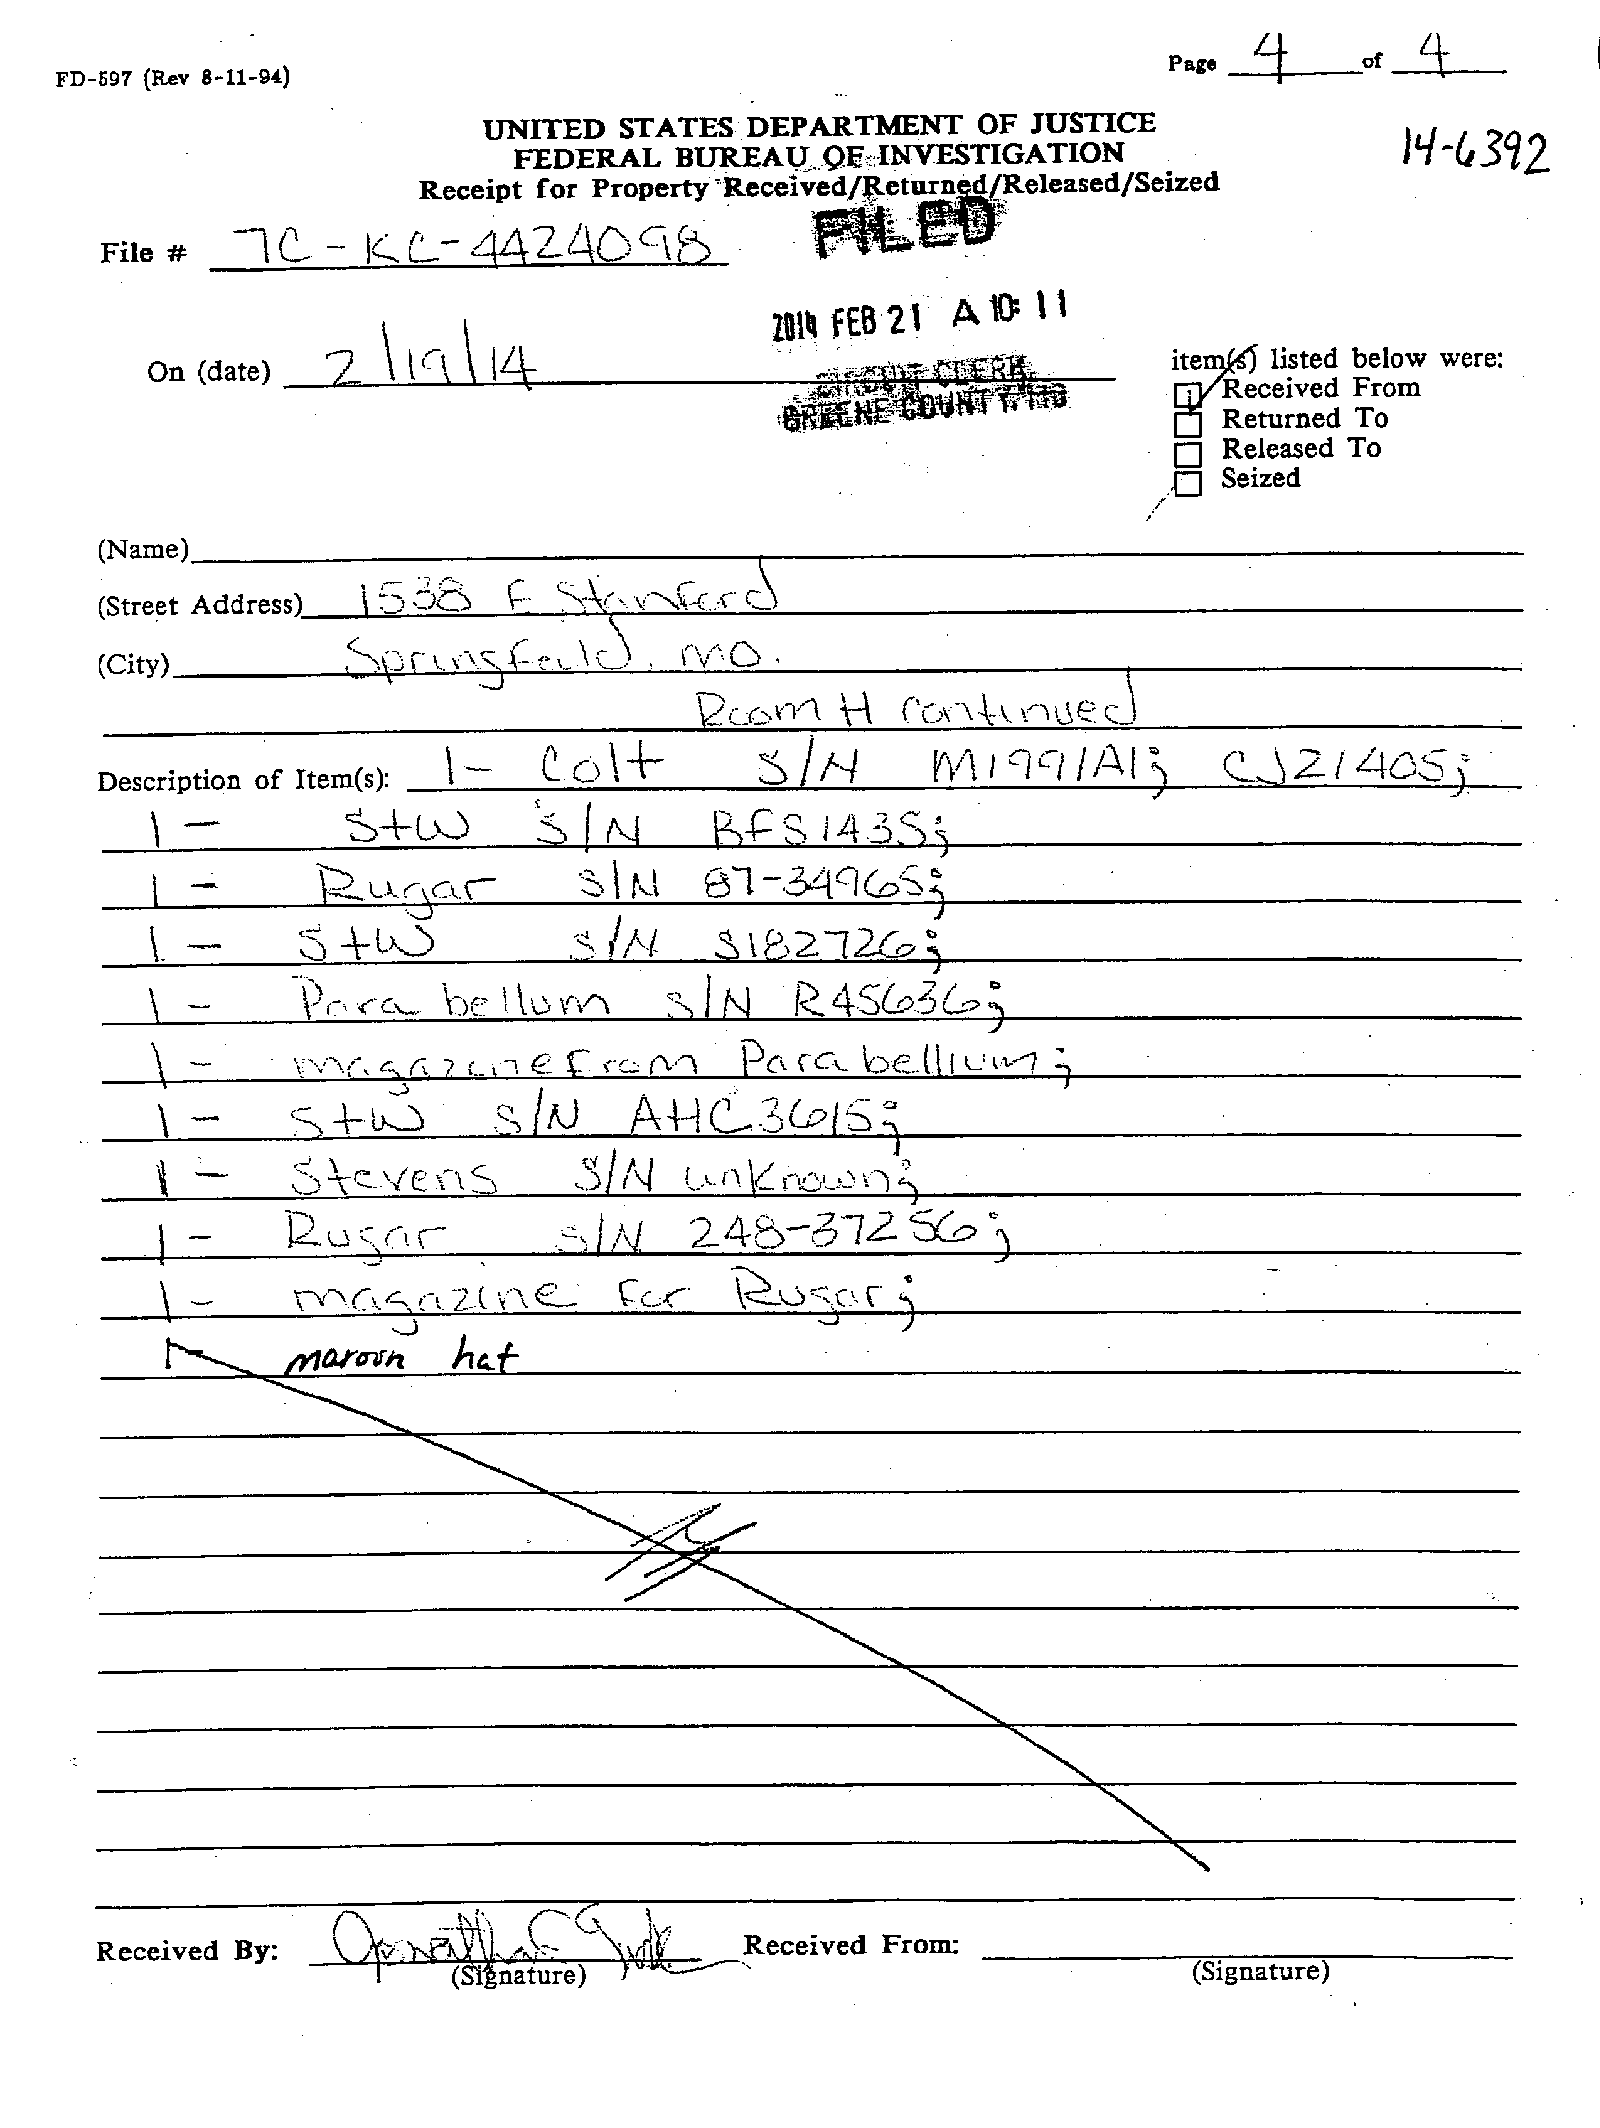 Copy of Search Warrant Return05.png